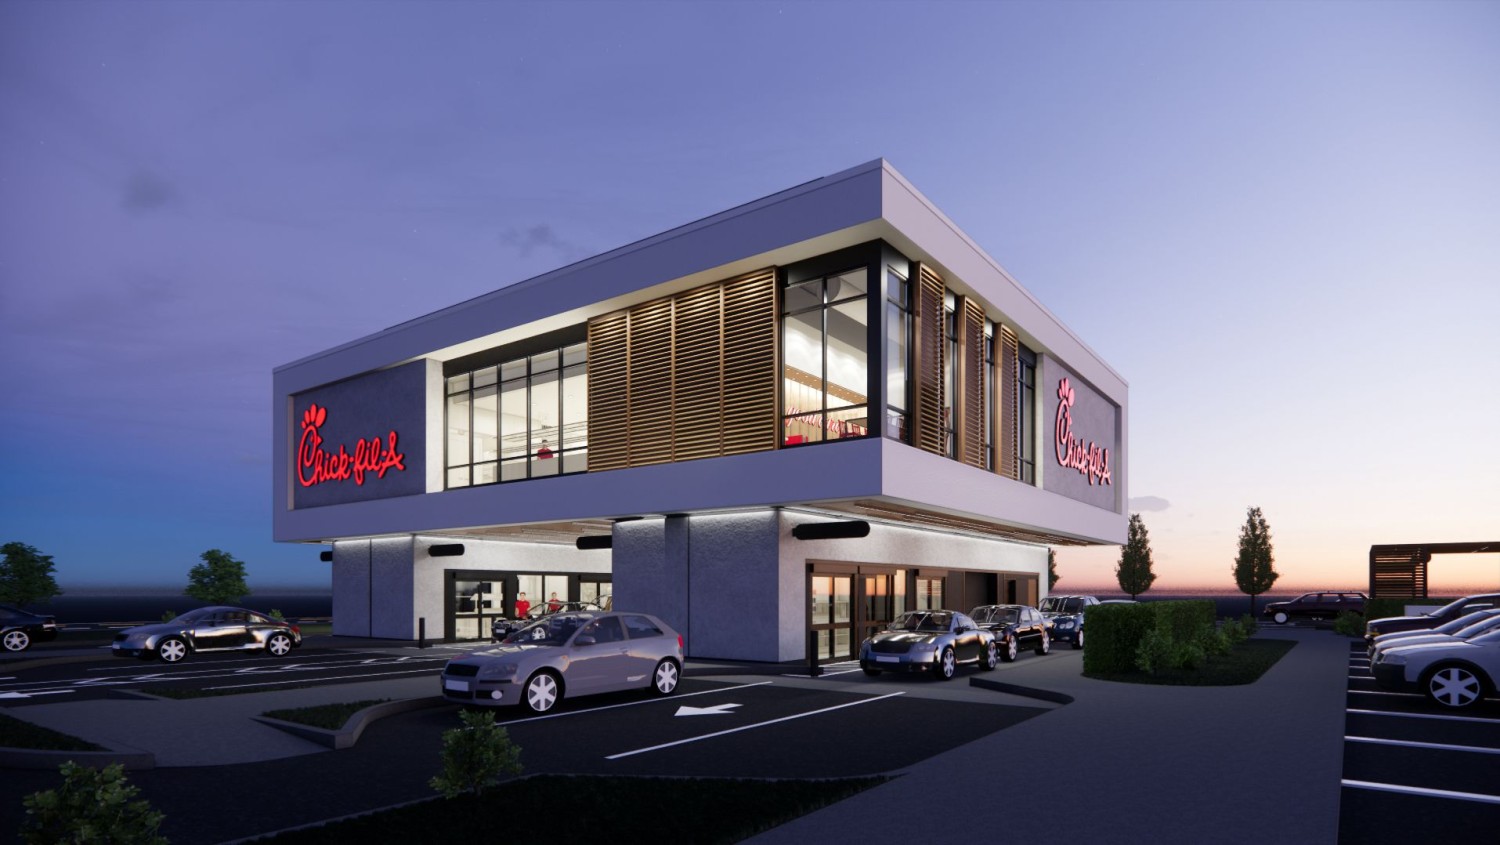 A rendering showing Chick-fil-A's new elevated drive-thru design. Courtesy of Chick-fil-A, Inc.